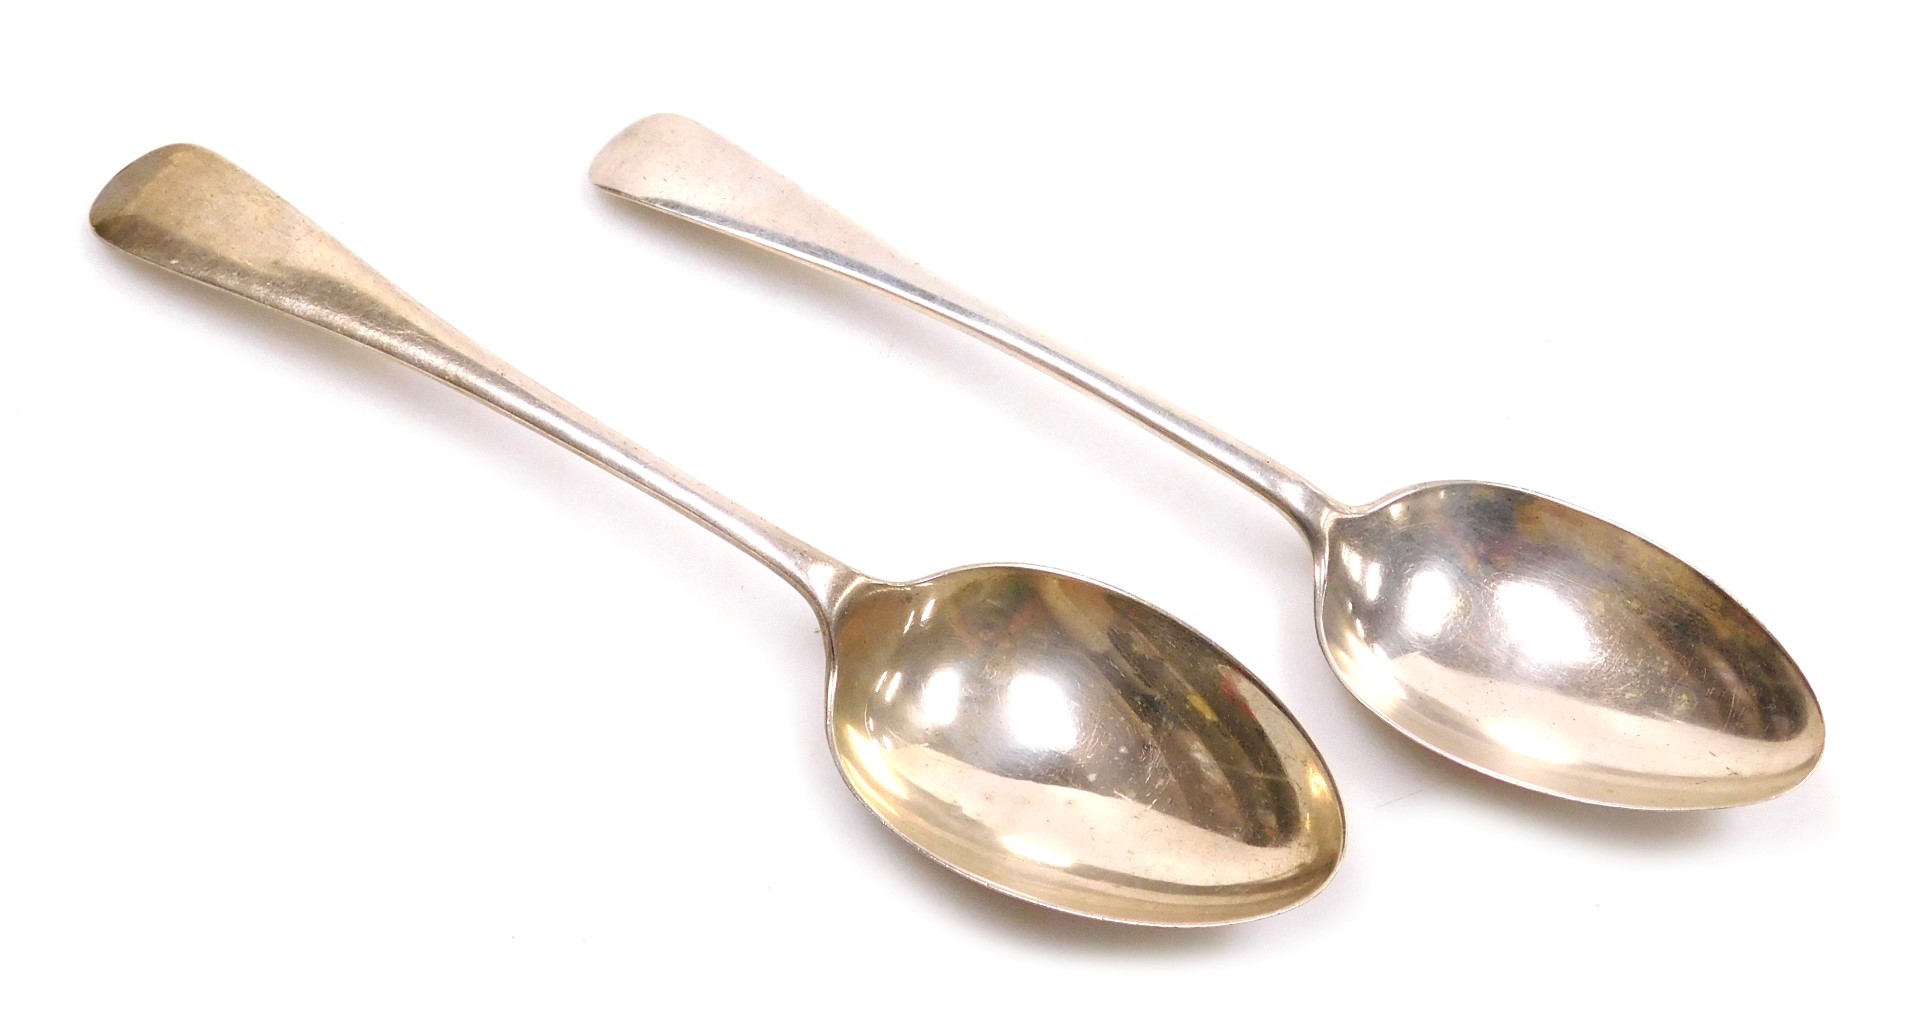 A George VI Old English pattern tablespoon, London 1937, and an Edward VII Old English pattern table